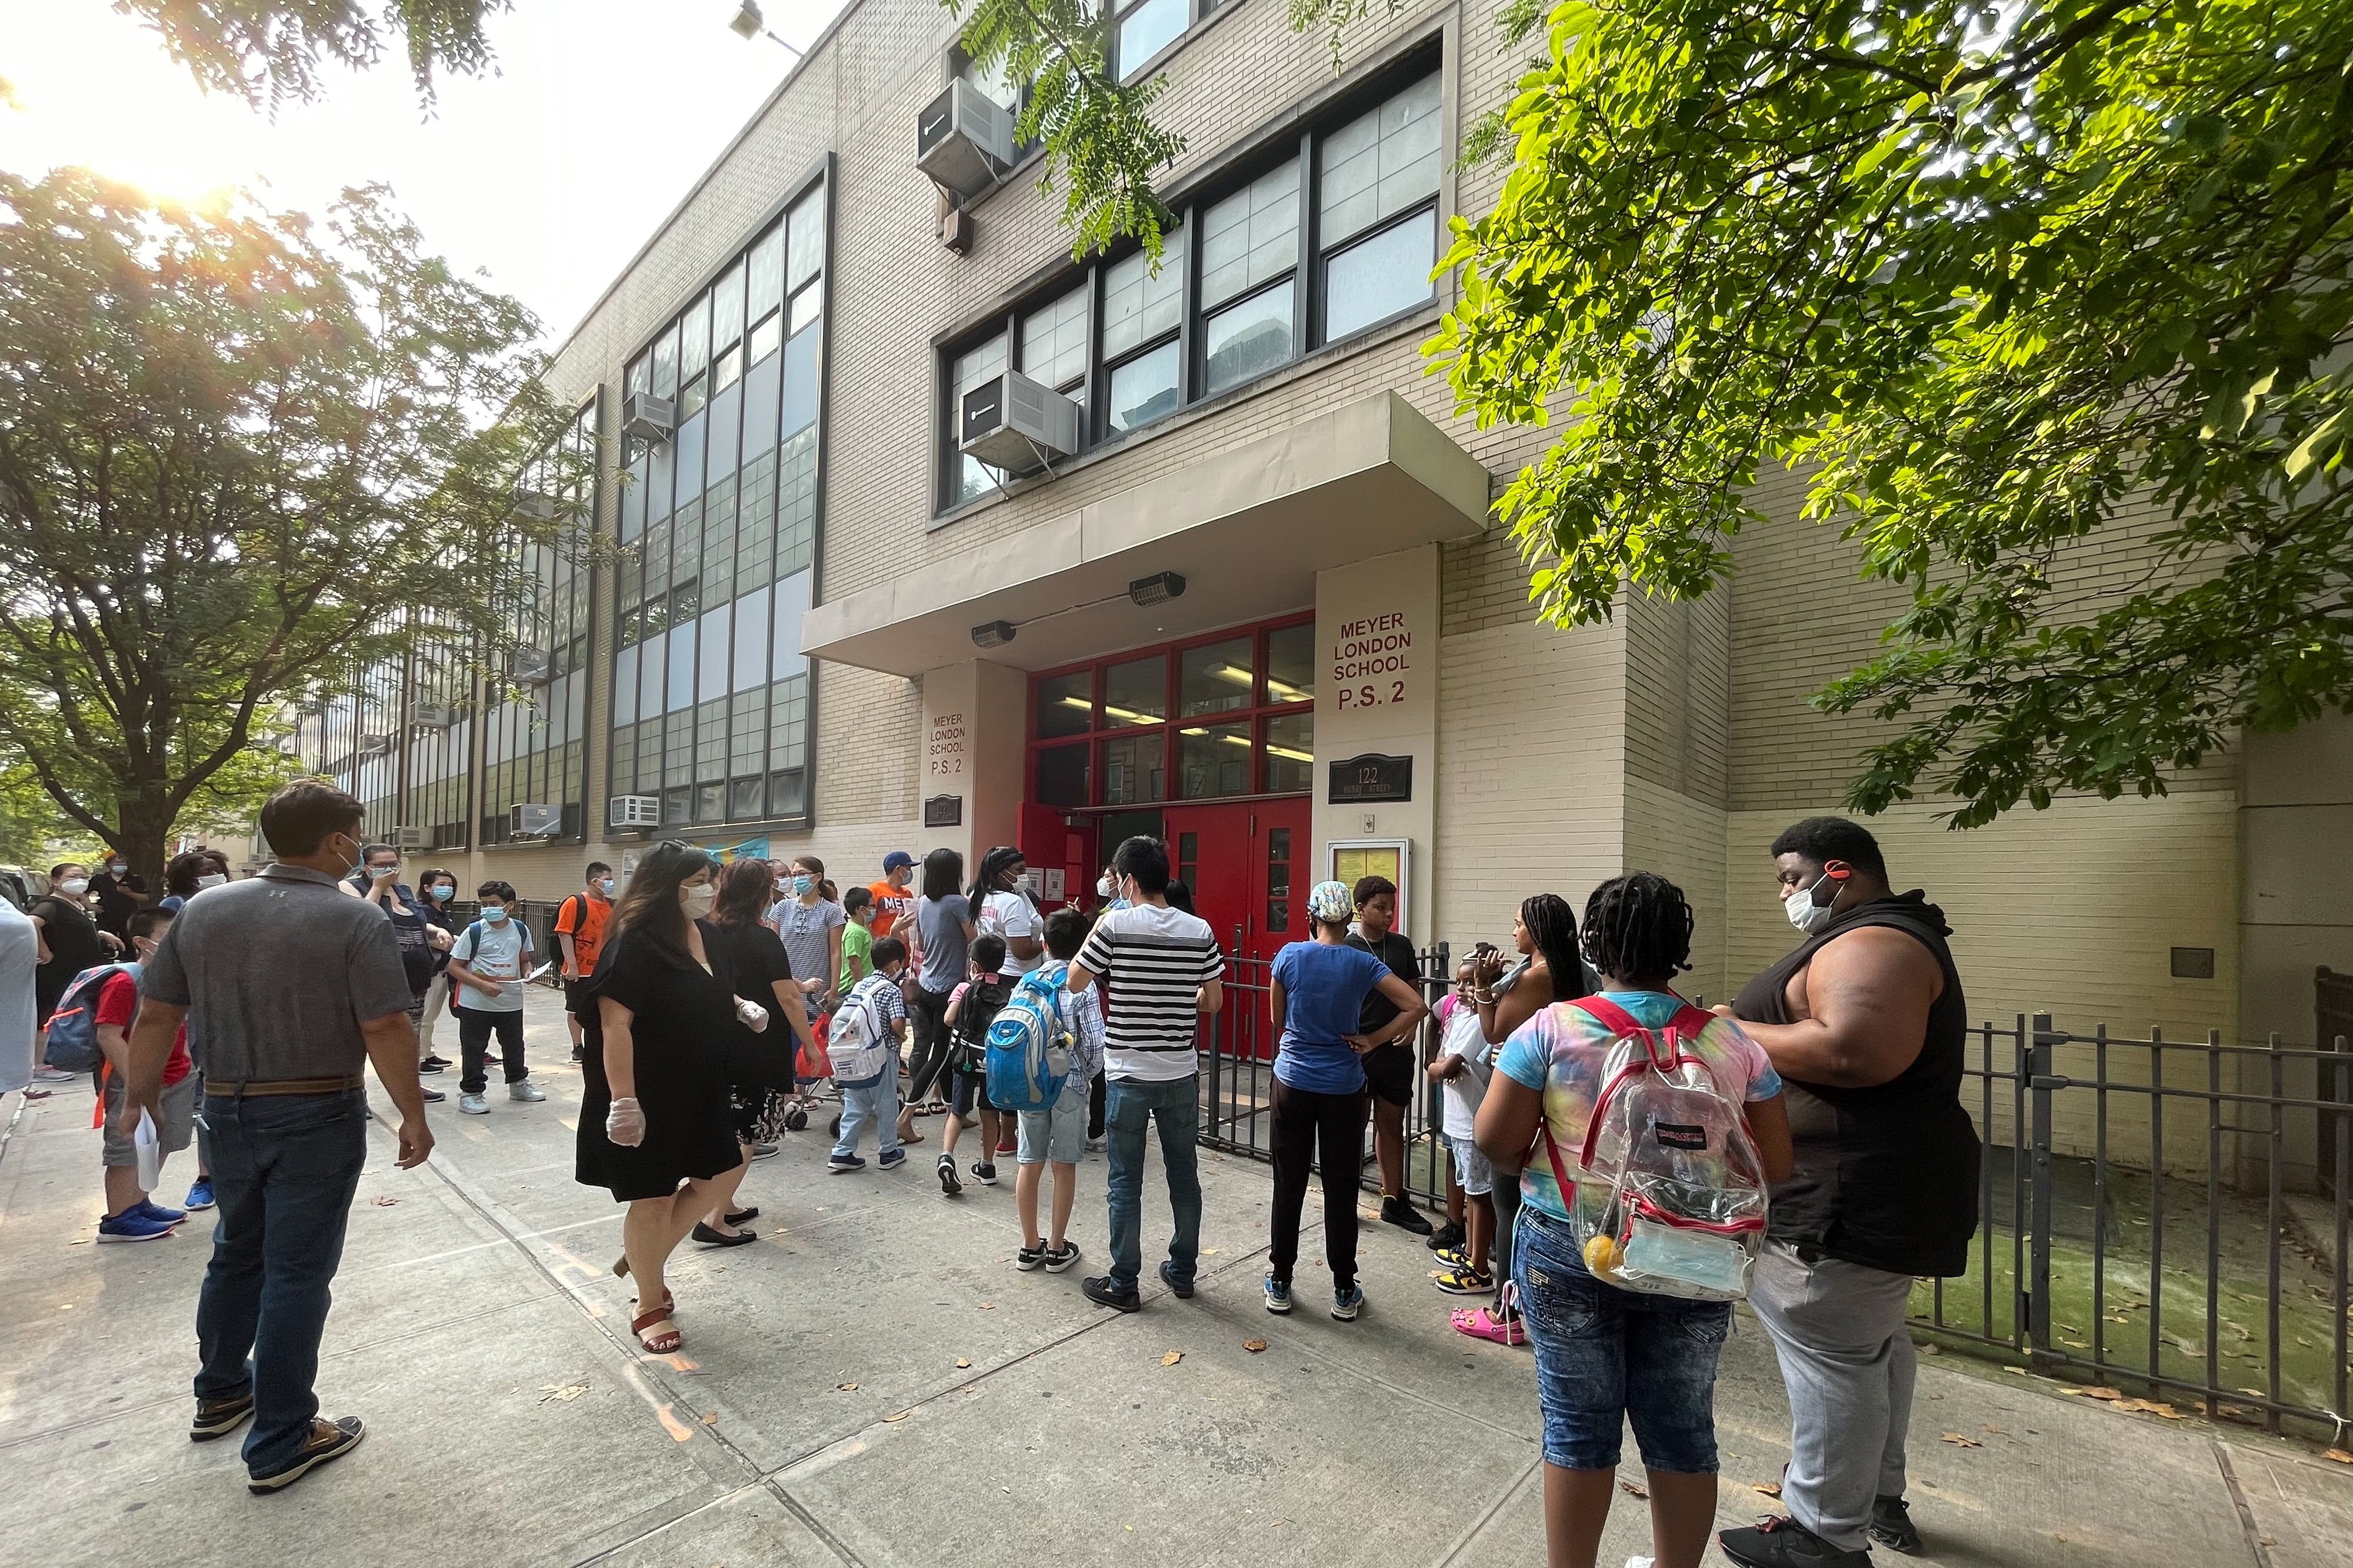 Several parents and their children wait outside of a school building before the start of a summer program. They are all wearing protective masks.